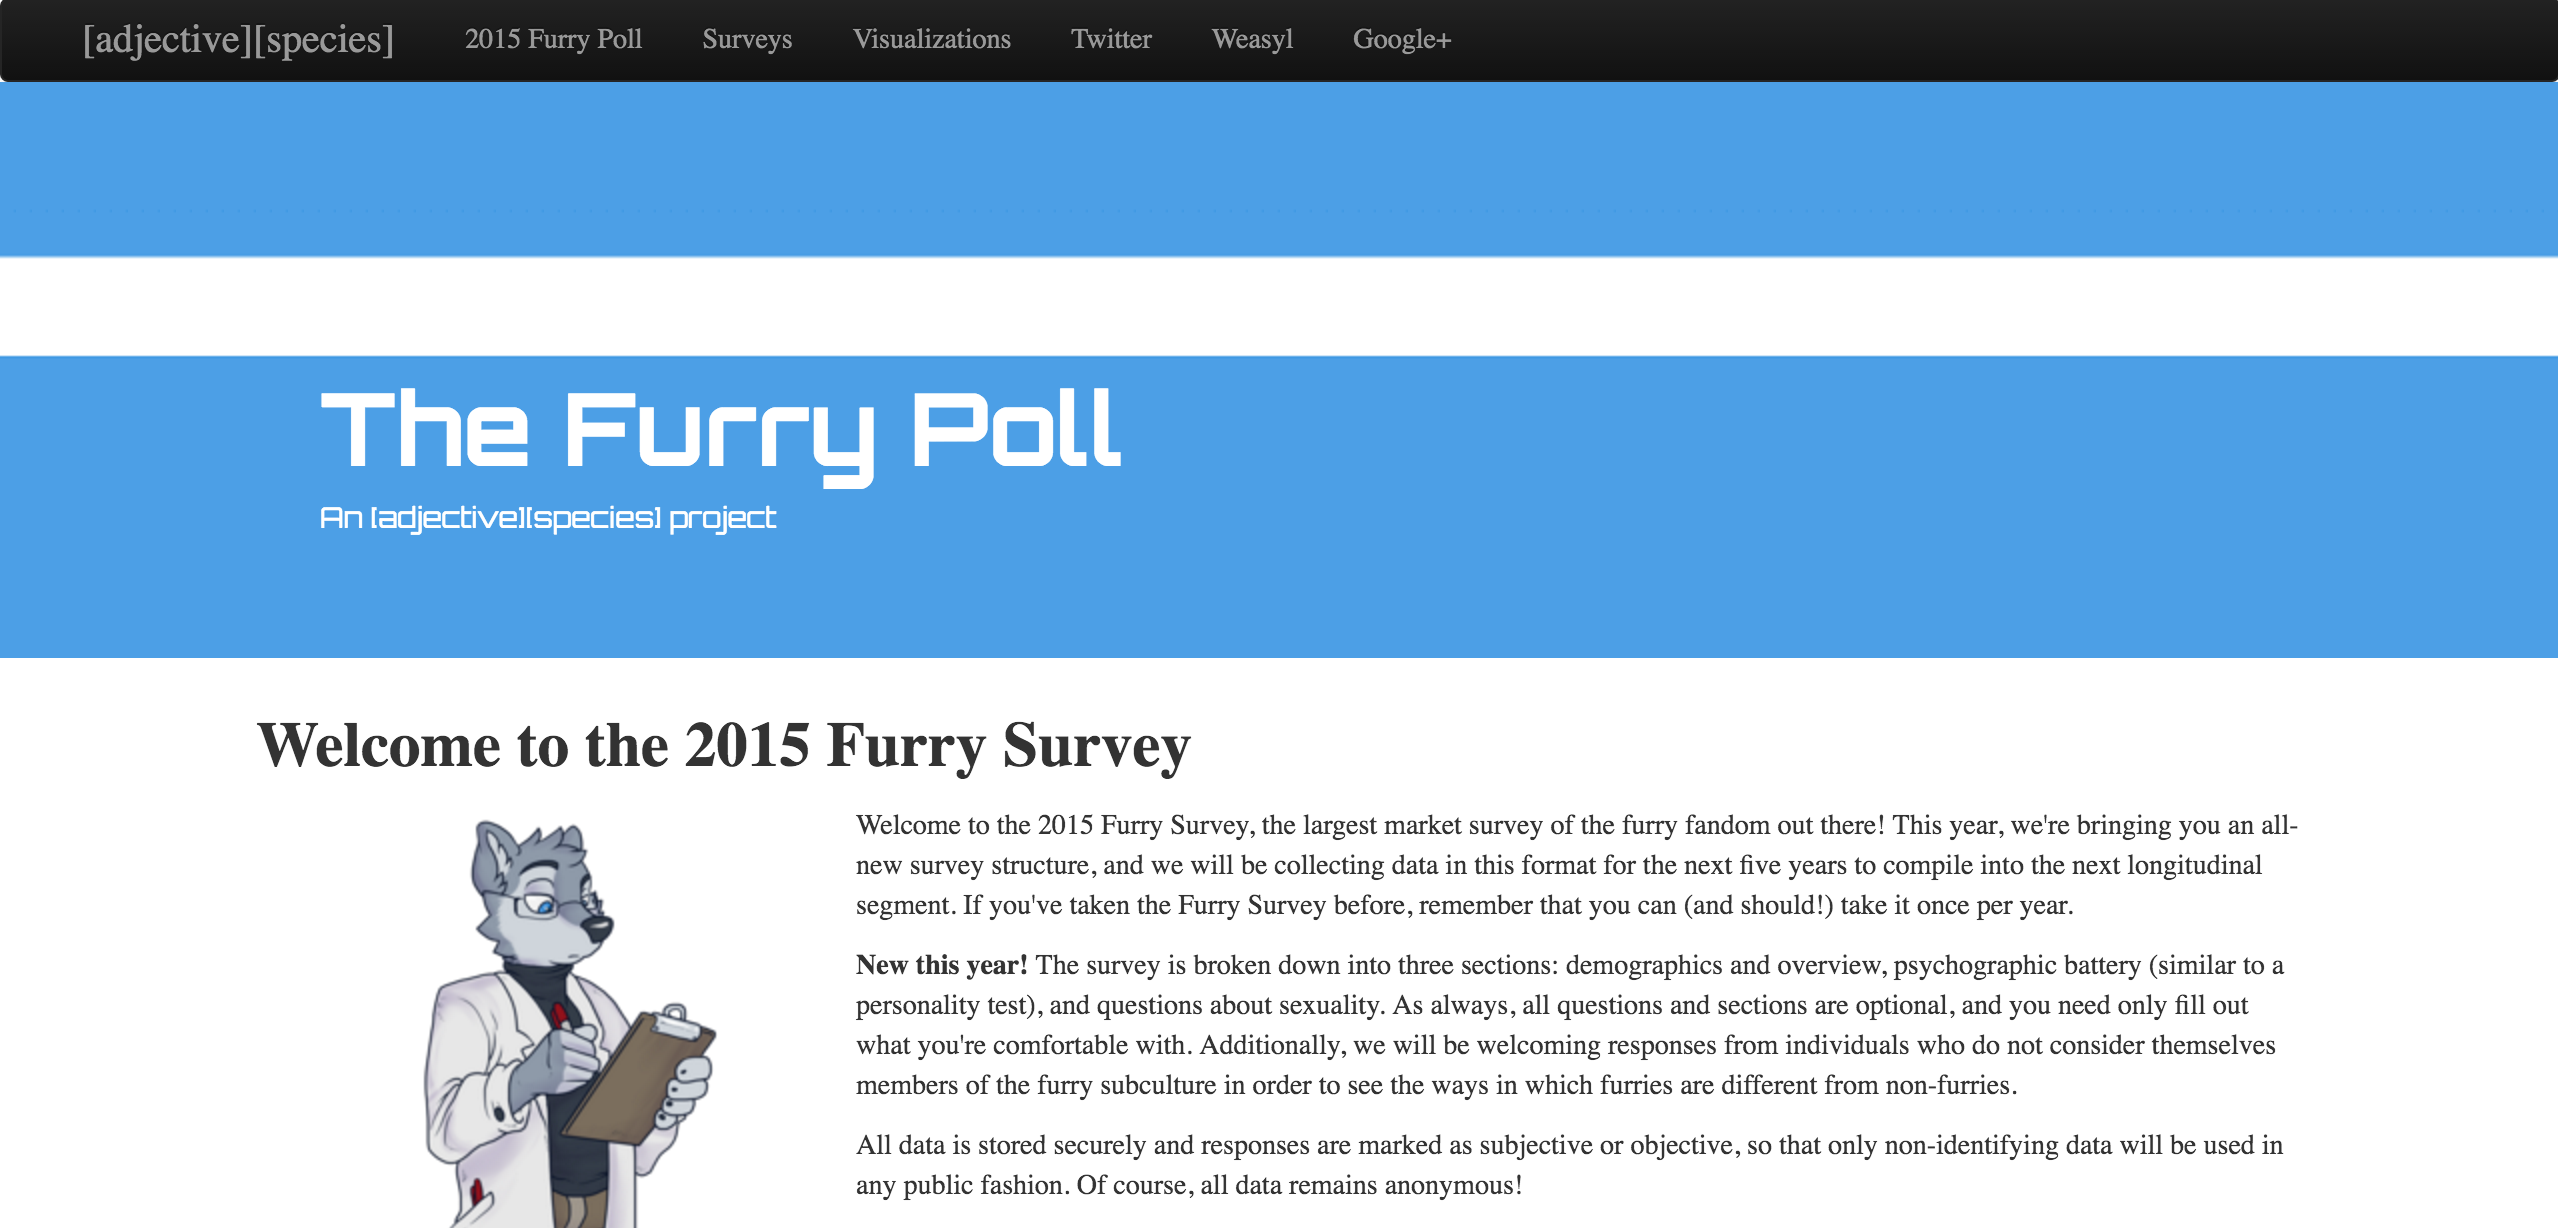 The Furry Poll